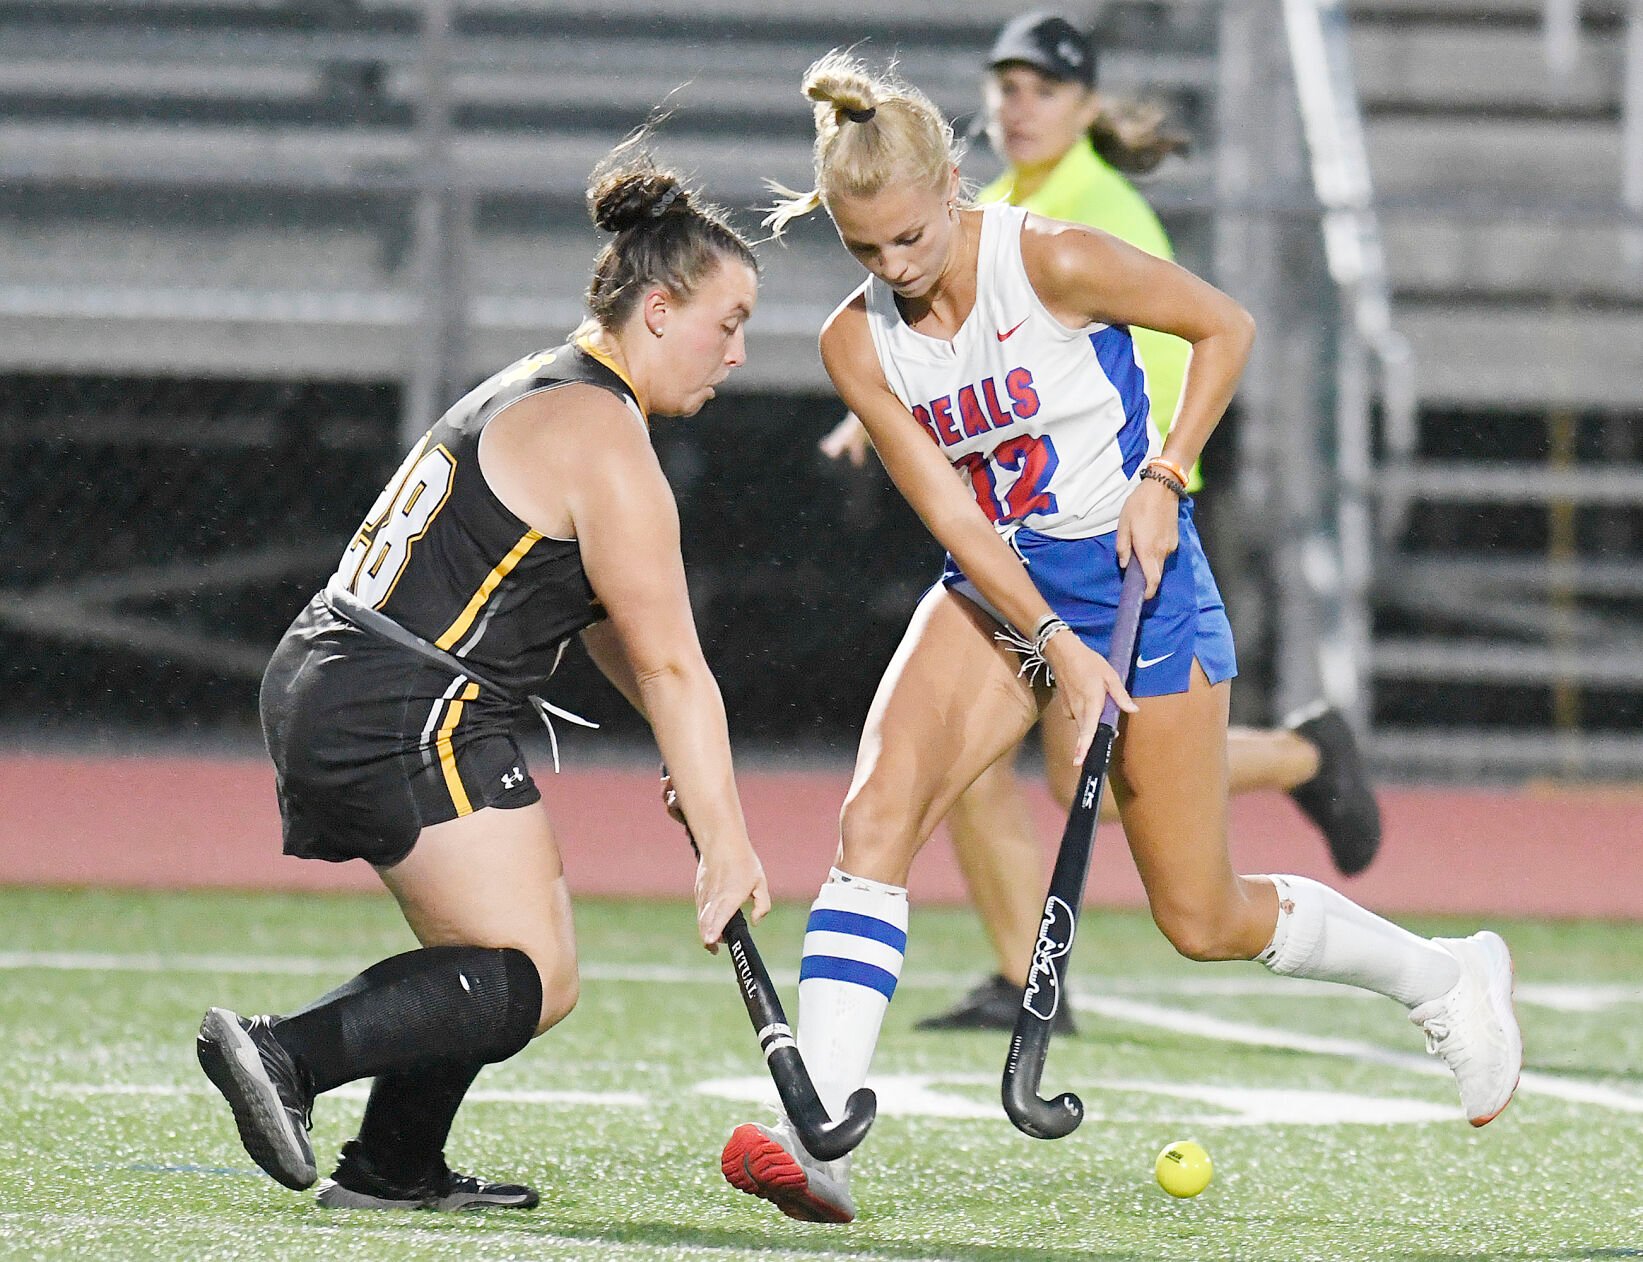 Lake-Lehman hold off Selinsgrove’s late surge for 2-1 victory